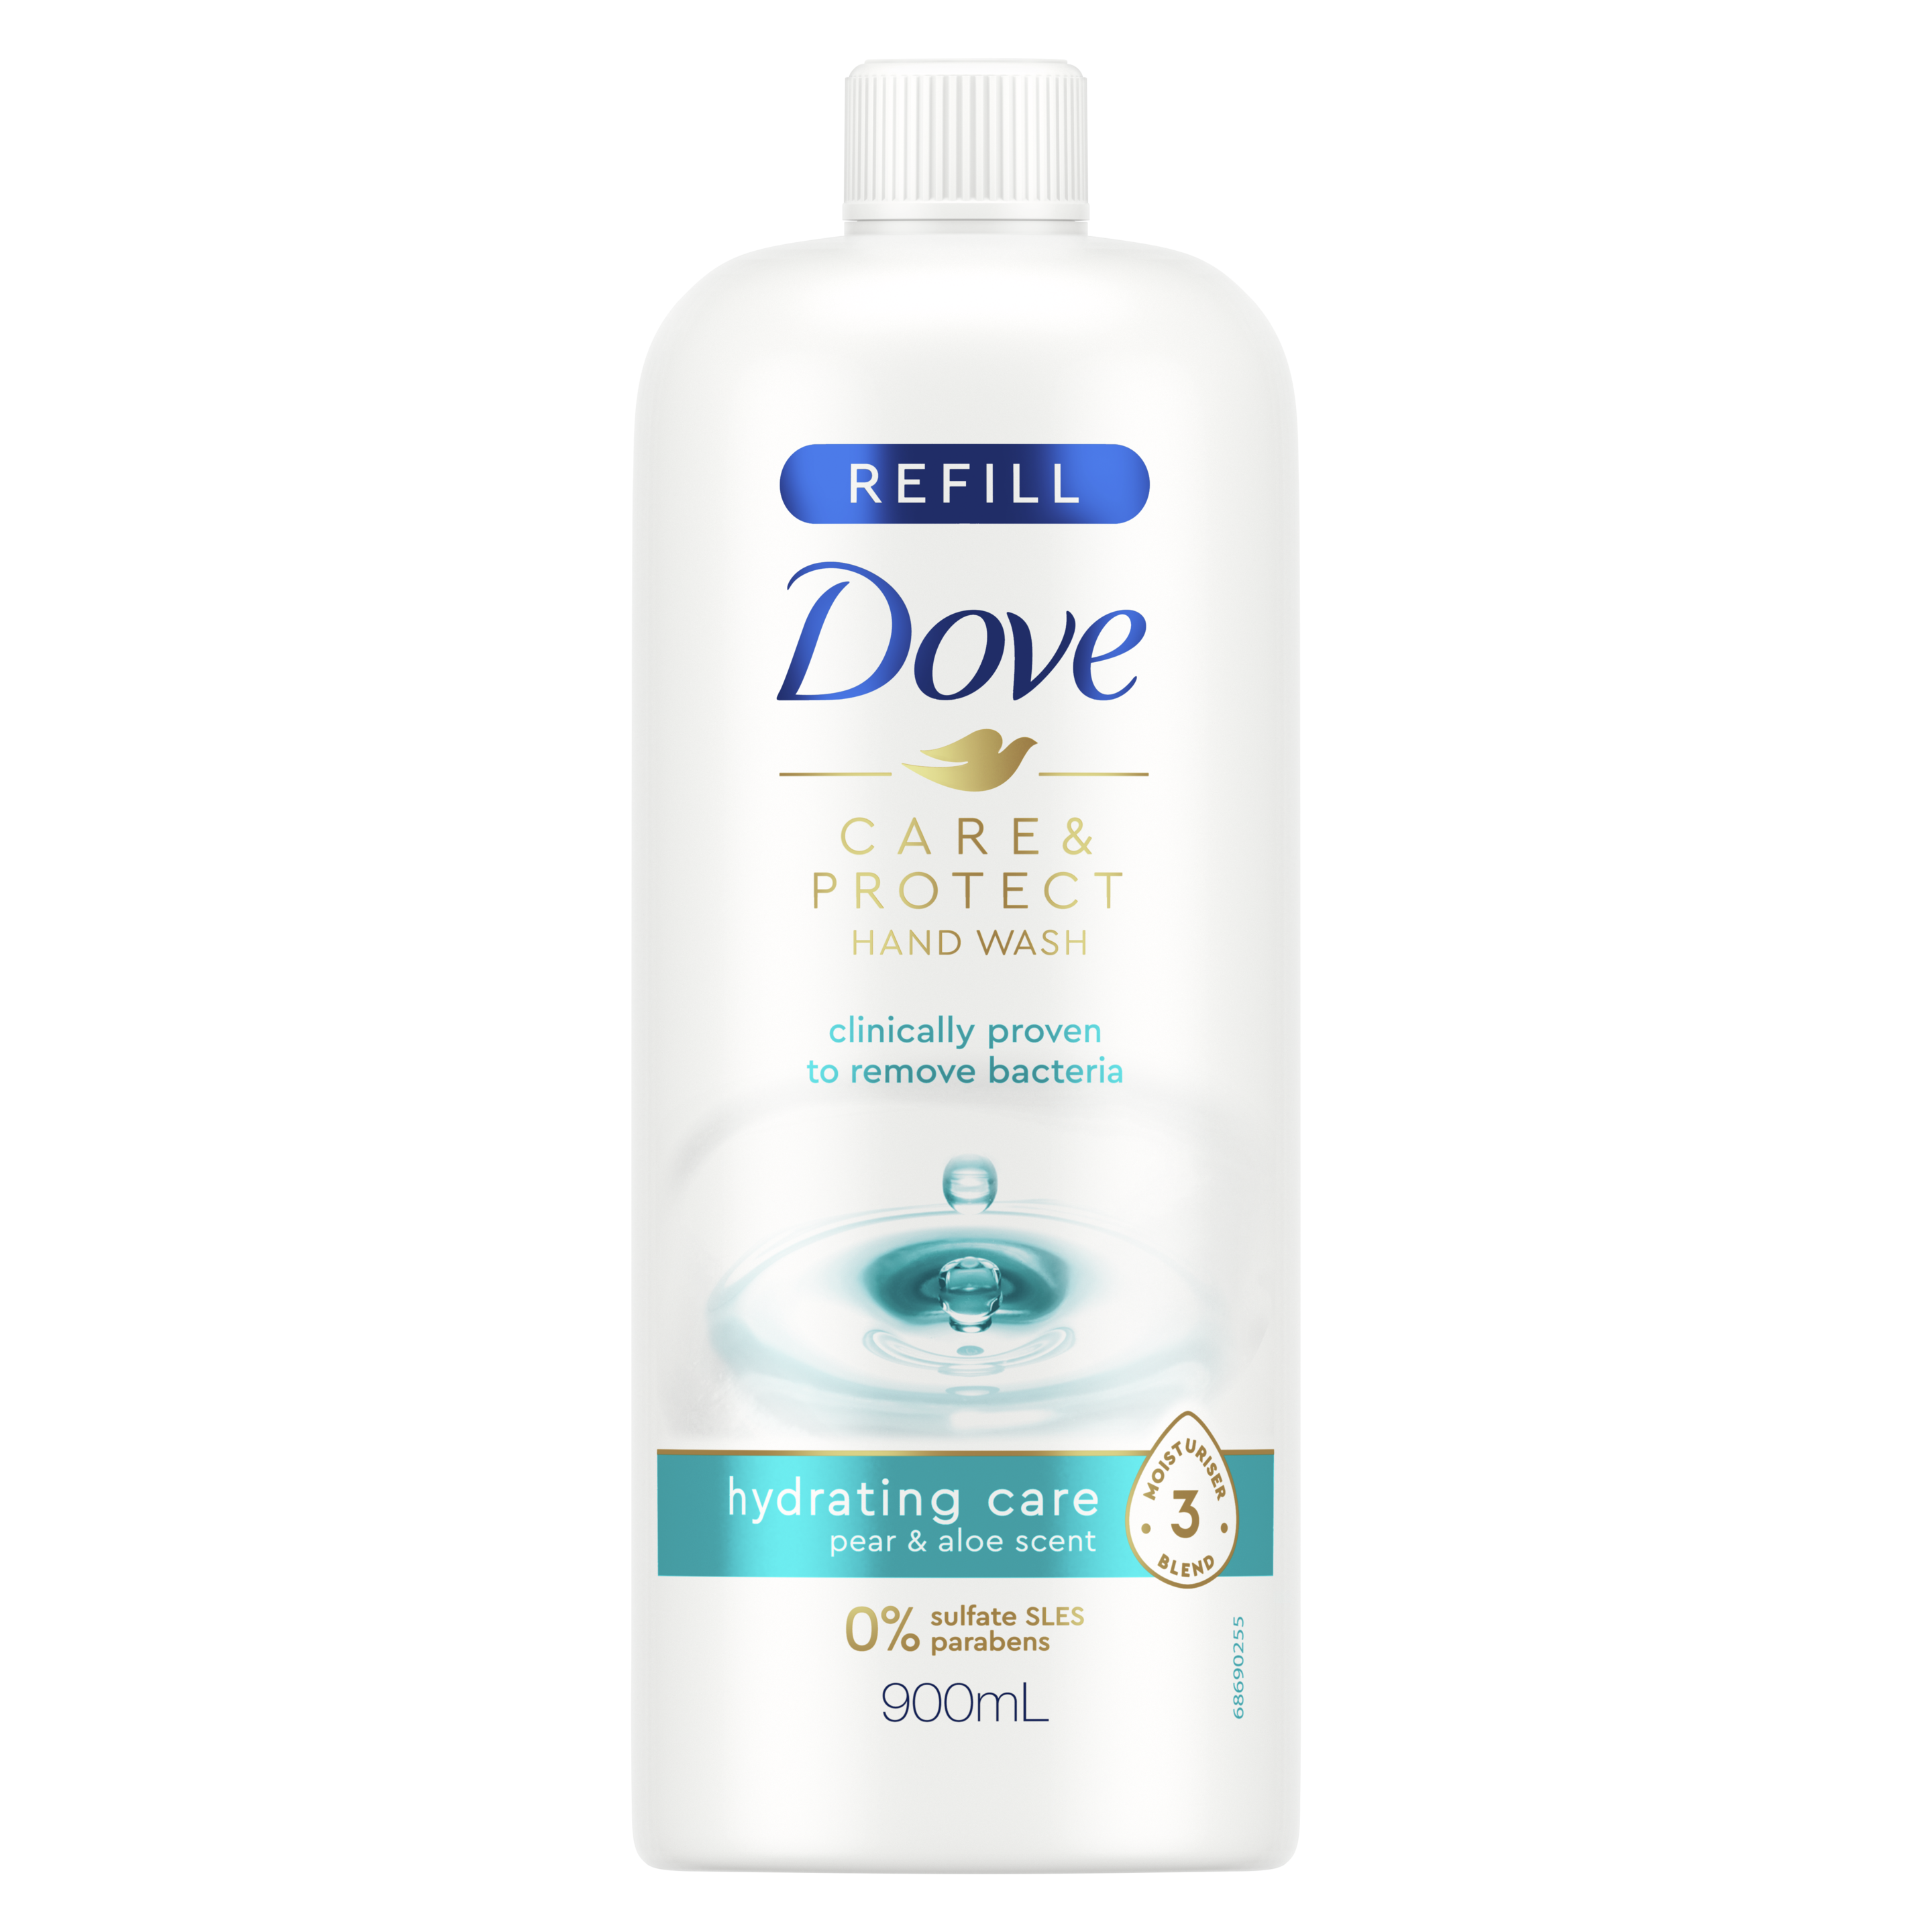 Dove Hydrating Care Hand Wash Refill 900ml